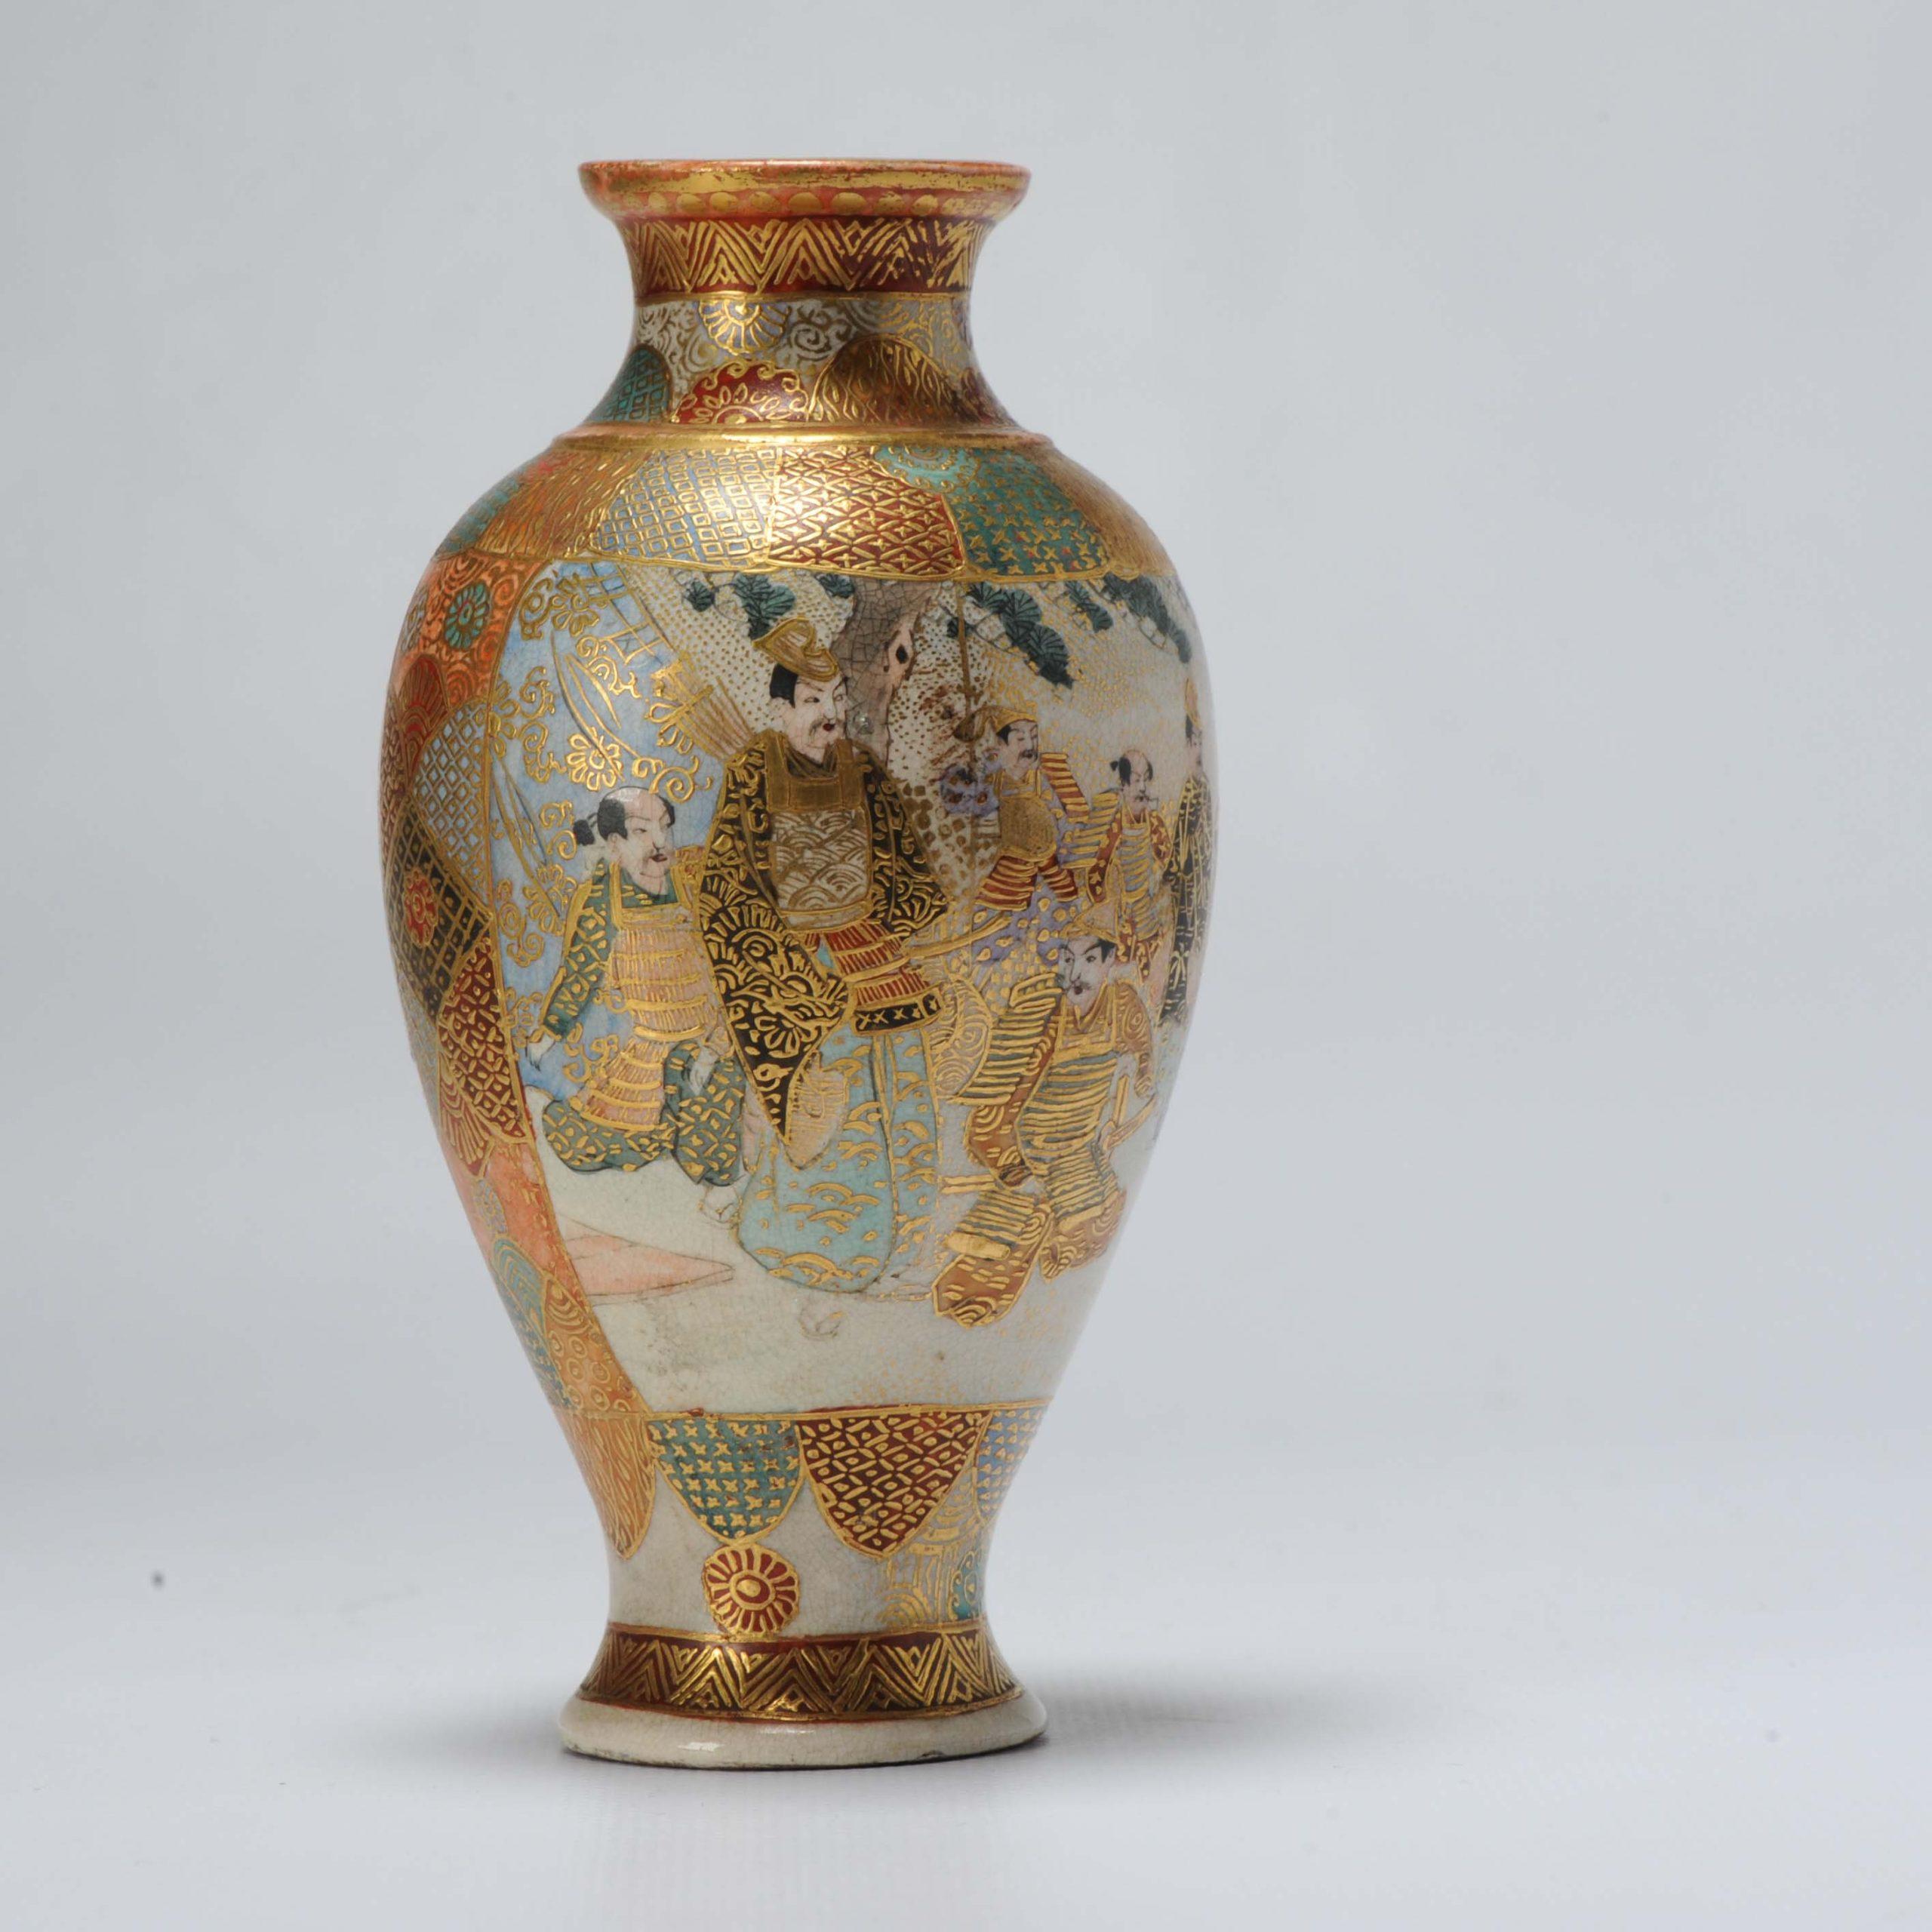 A lovely Satsuma vase. Marked base.

Additional information:
Material: Porcelain & Pottery
Japanese Style: Satsuma
Region of Origin: Japan
Period: 19th century Meiji Periode (1867-1912)
Condition: Perfect, some gilt loss only.
Original/Reproduction: